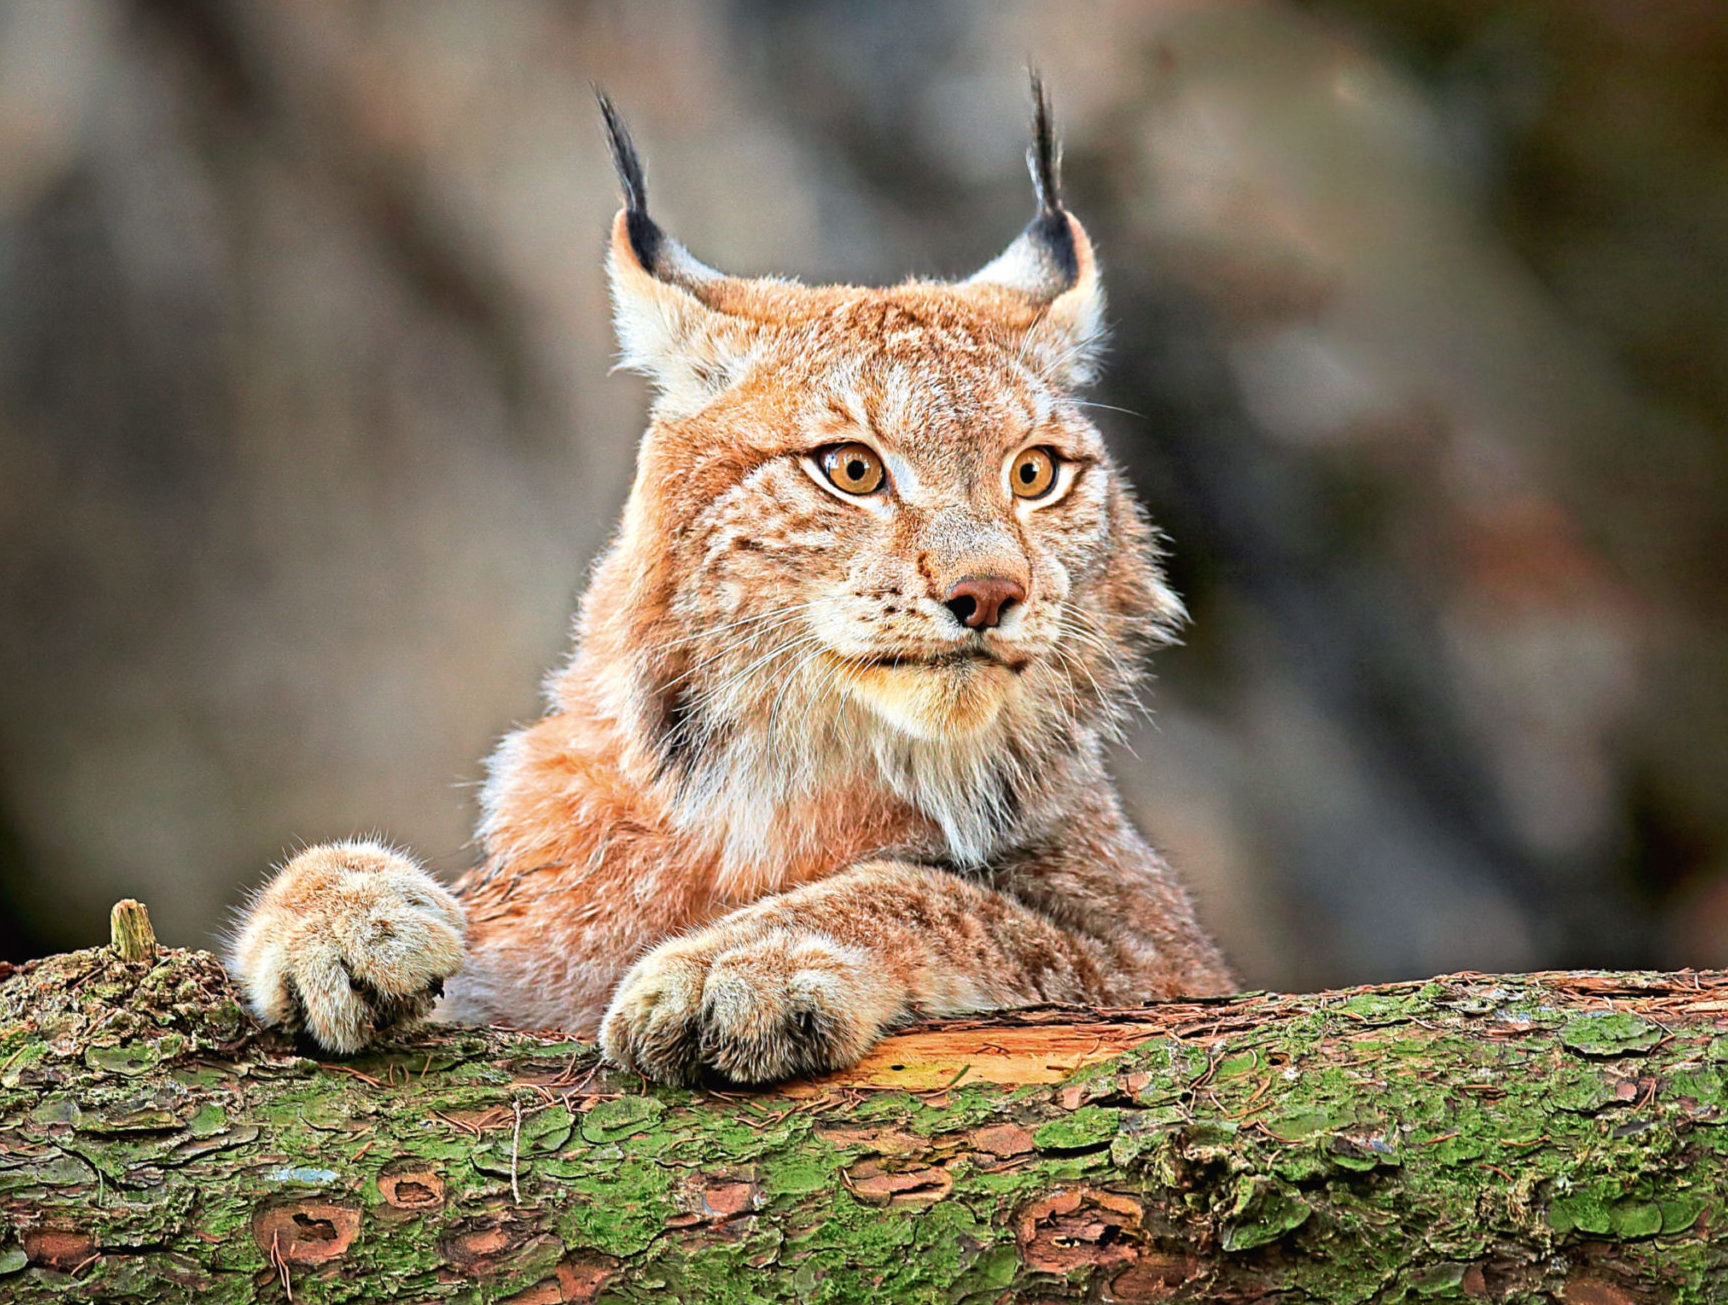 The Lynx UK Trust wants to reintroduce three of the predators in the Queen Elizabeth Forest Park.